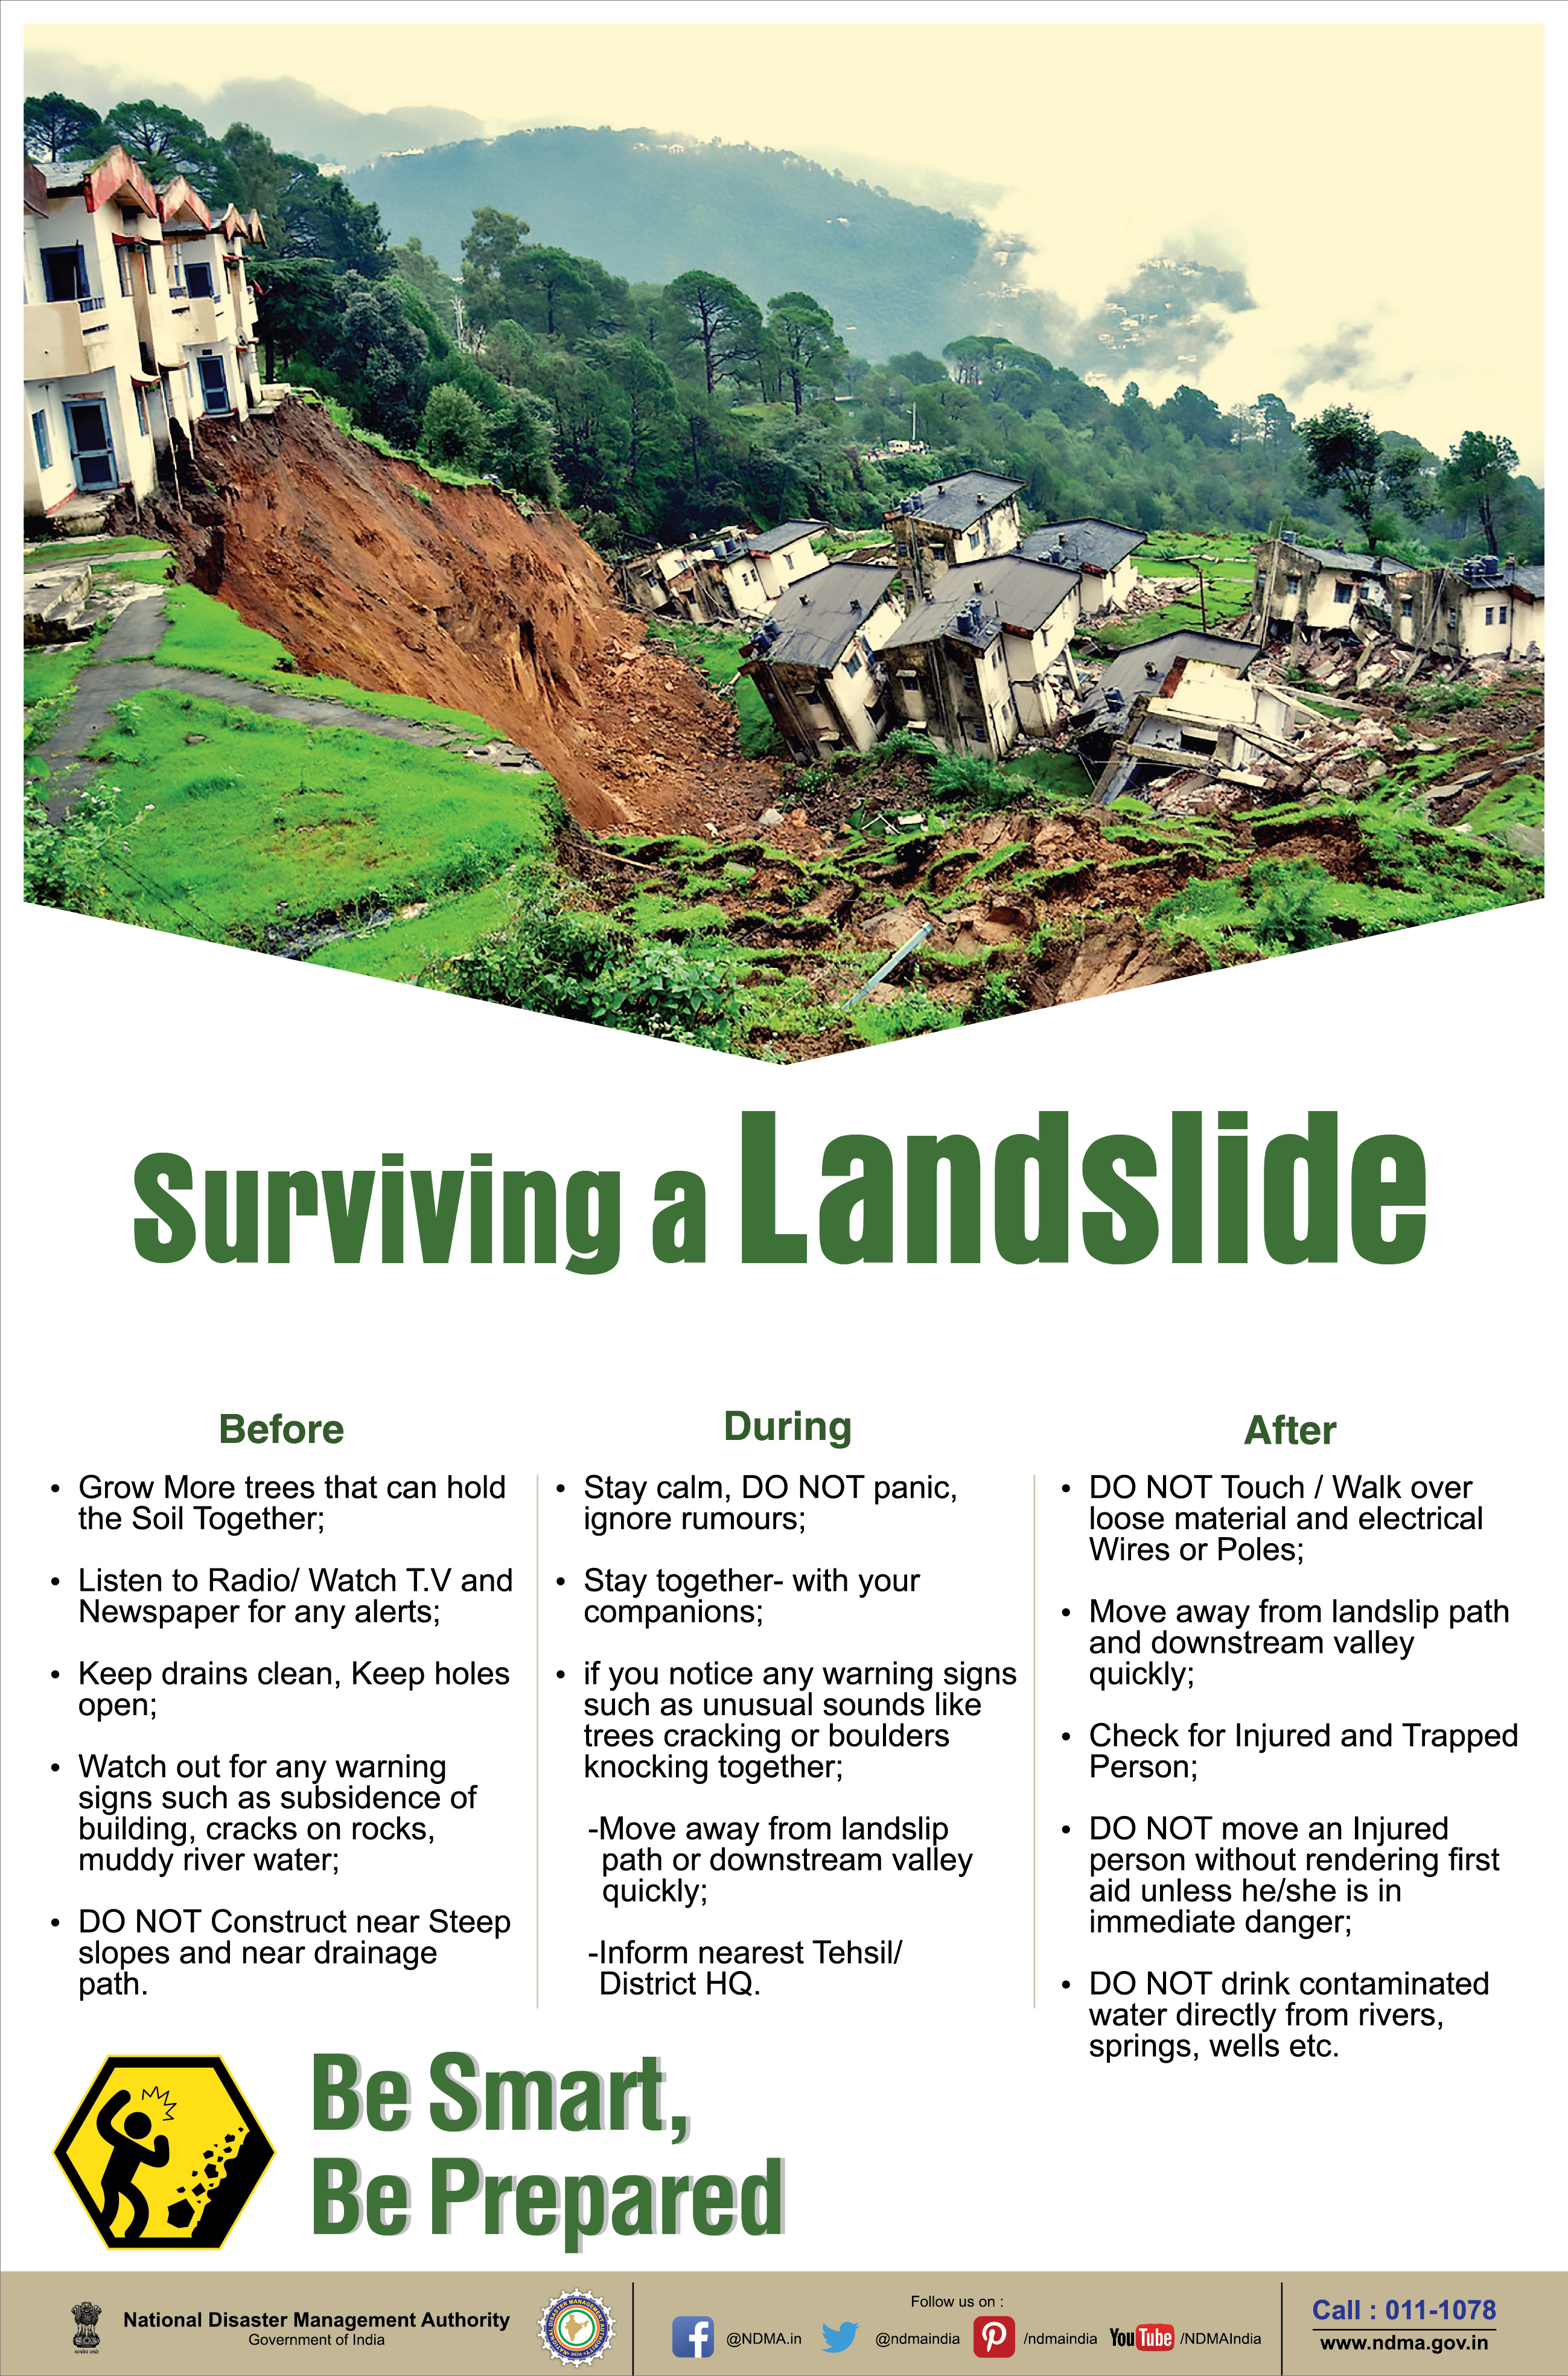 Survive a landslide with these do’s and don’ts 